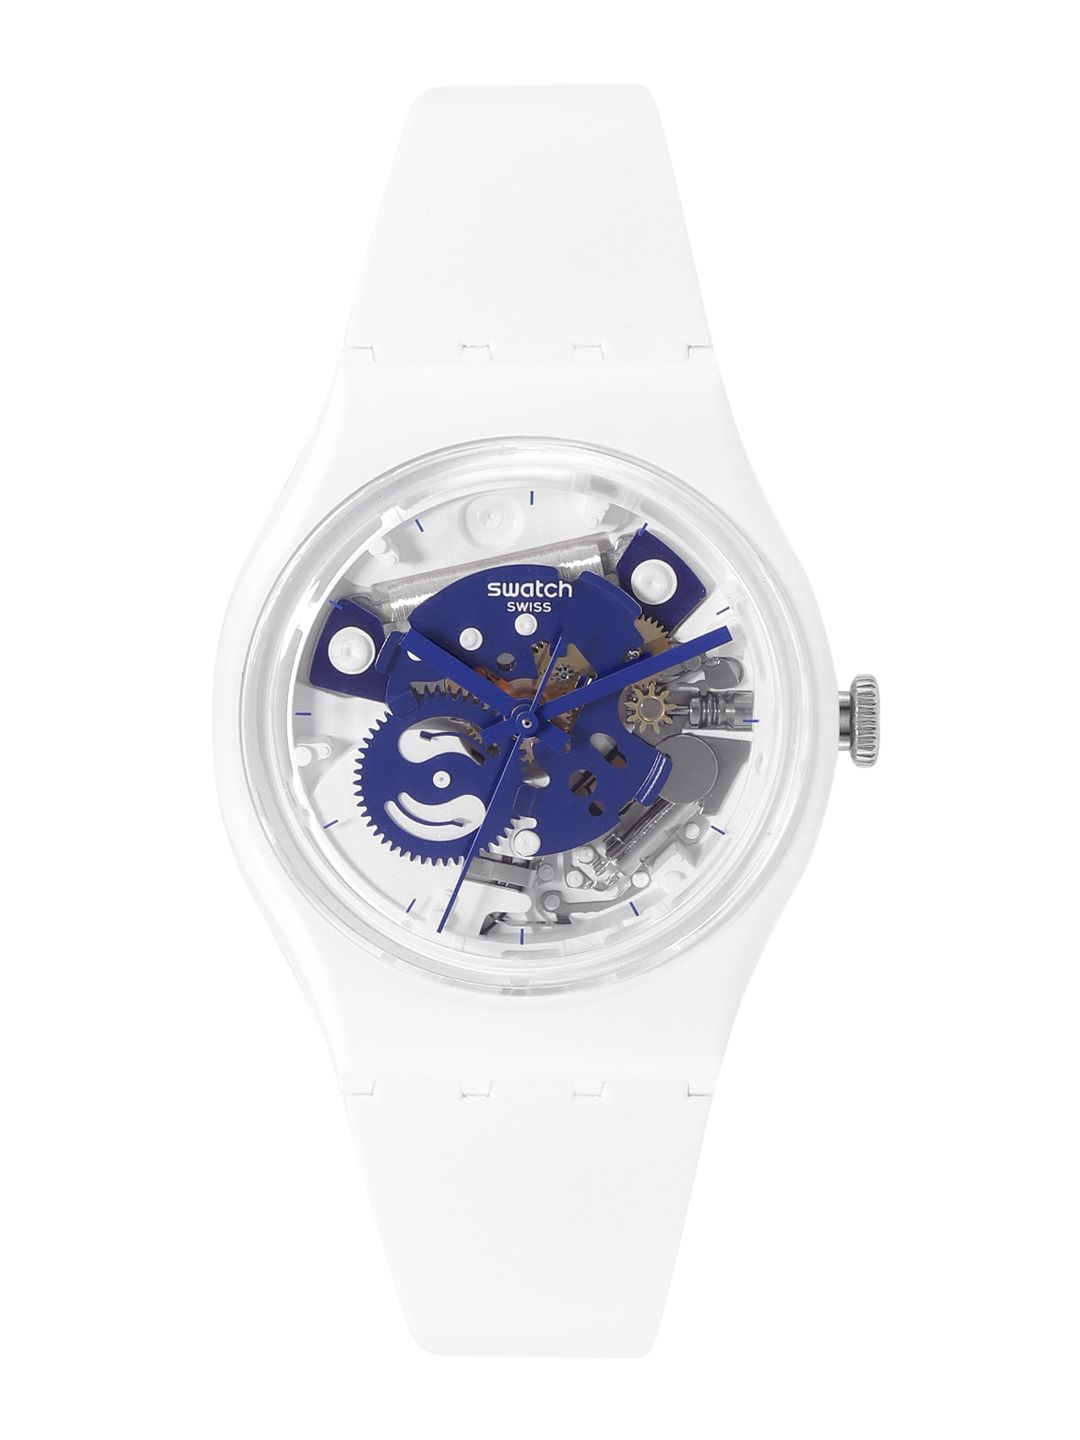 Swatch Unisex White Patterned Dial & White Ceramic Straps Water Resistant Analogue Watch Price in India